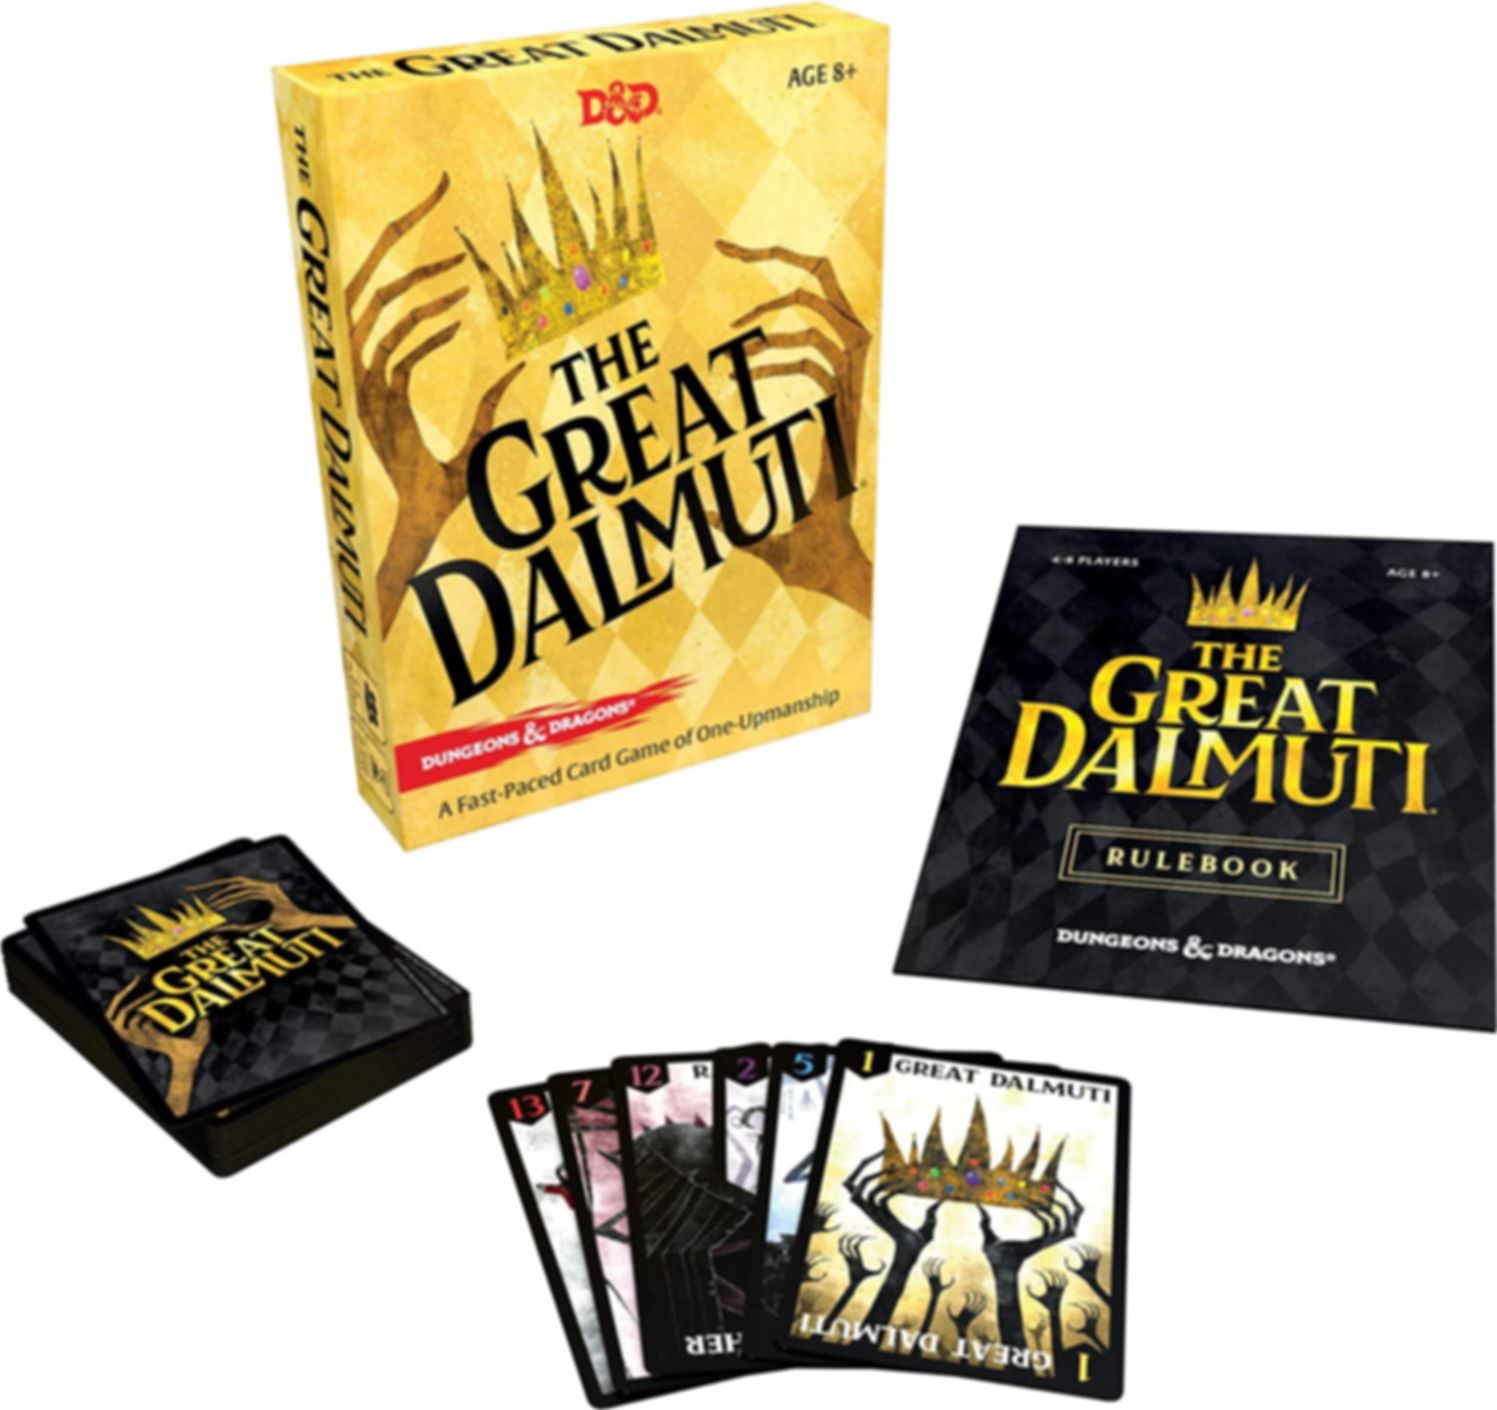 The Great Dalmuti: Dungeons & Dragons componenti